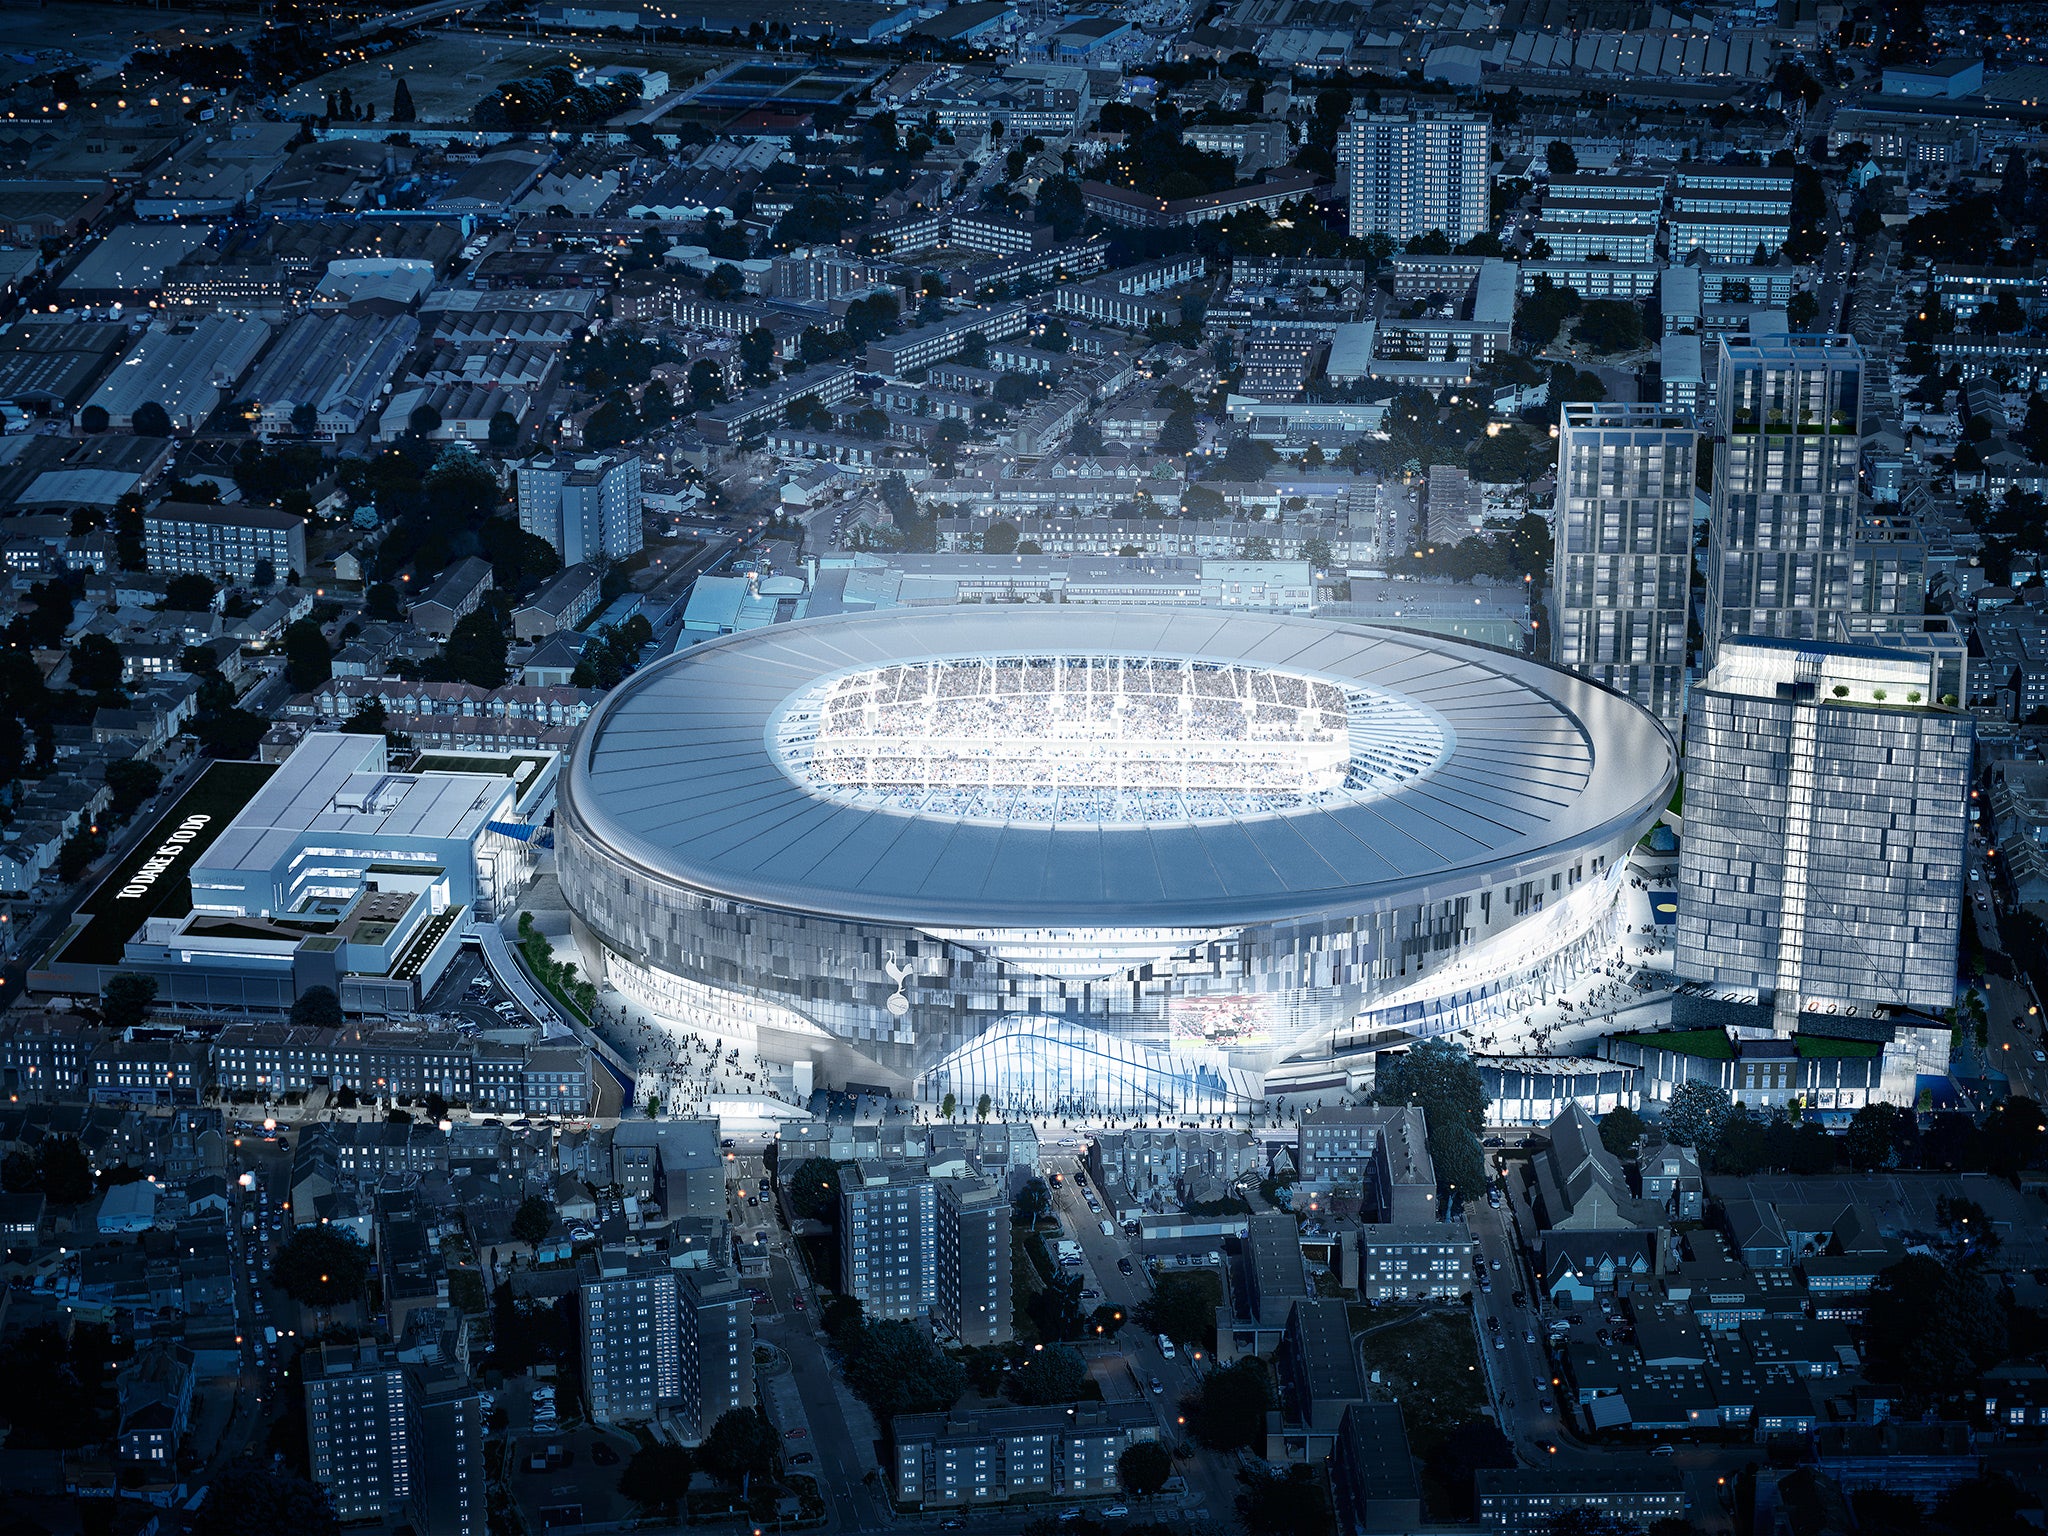 Tottenham are set to leave White Hart Lane for a brand new home